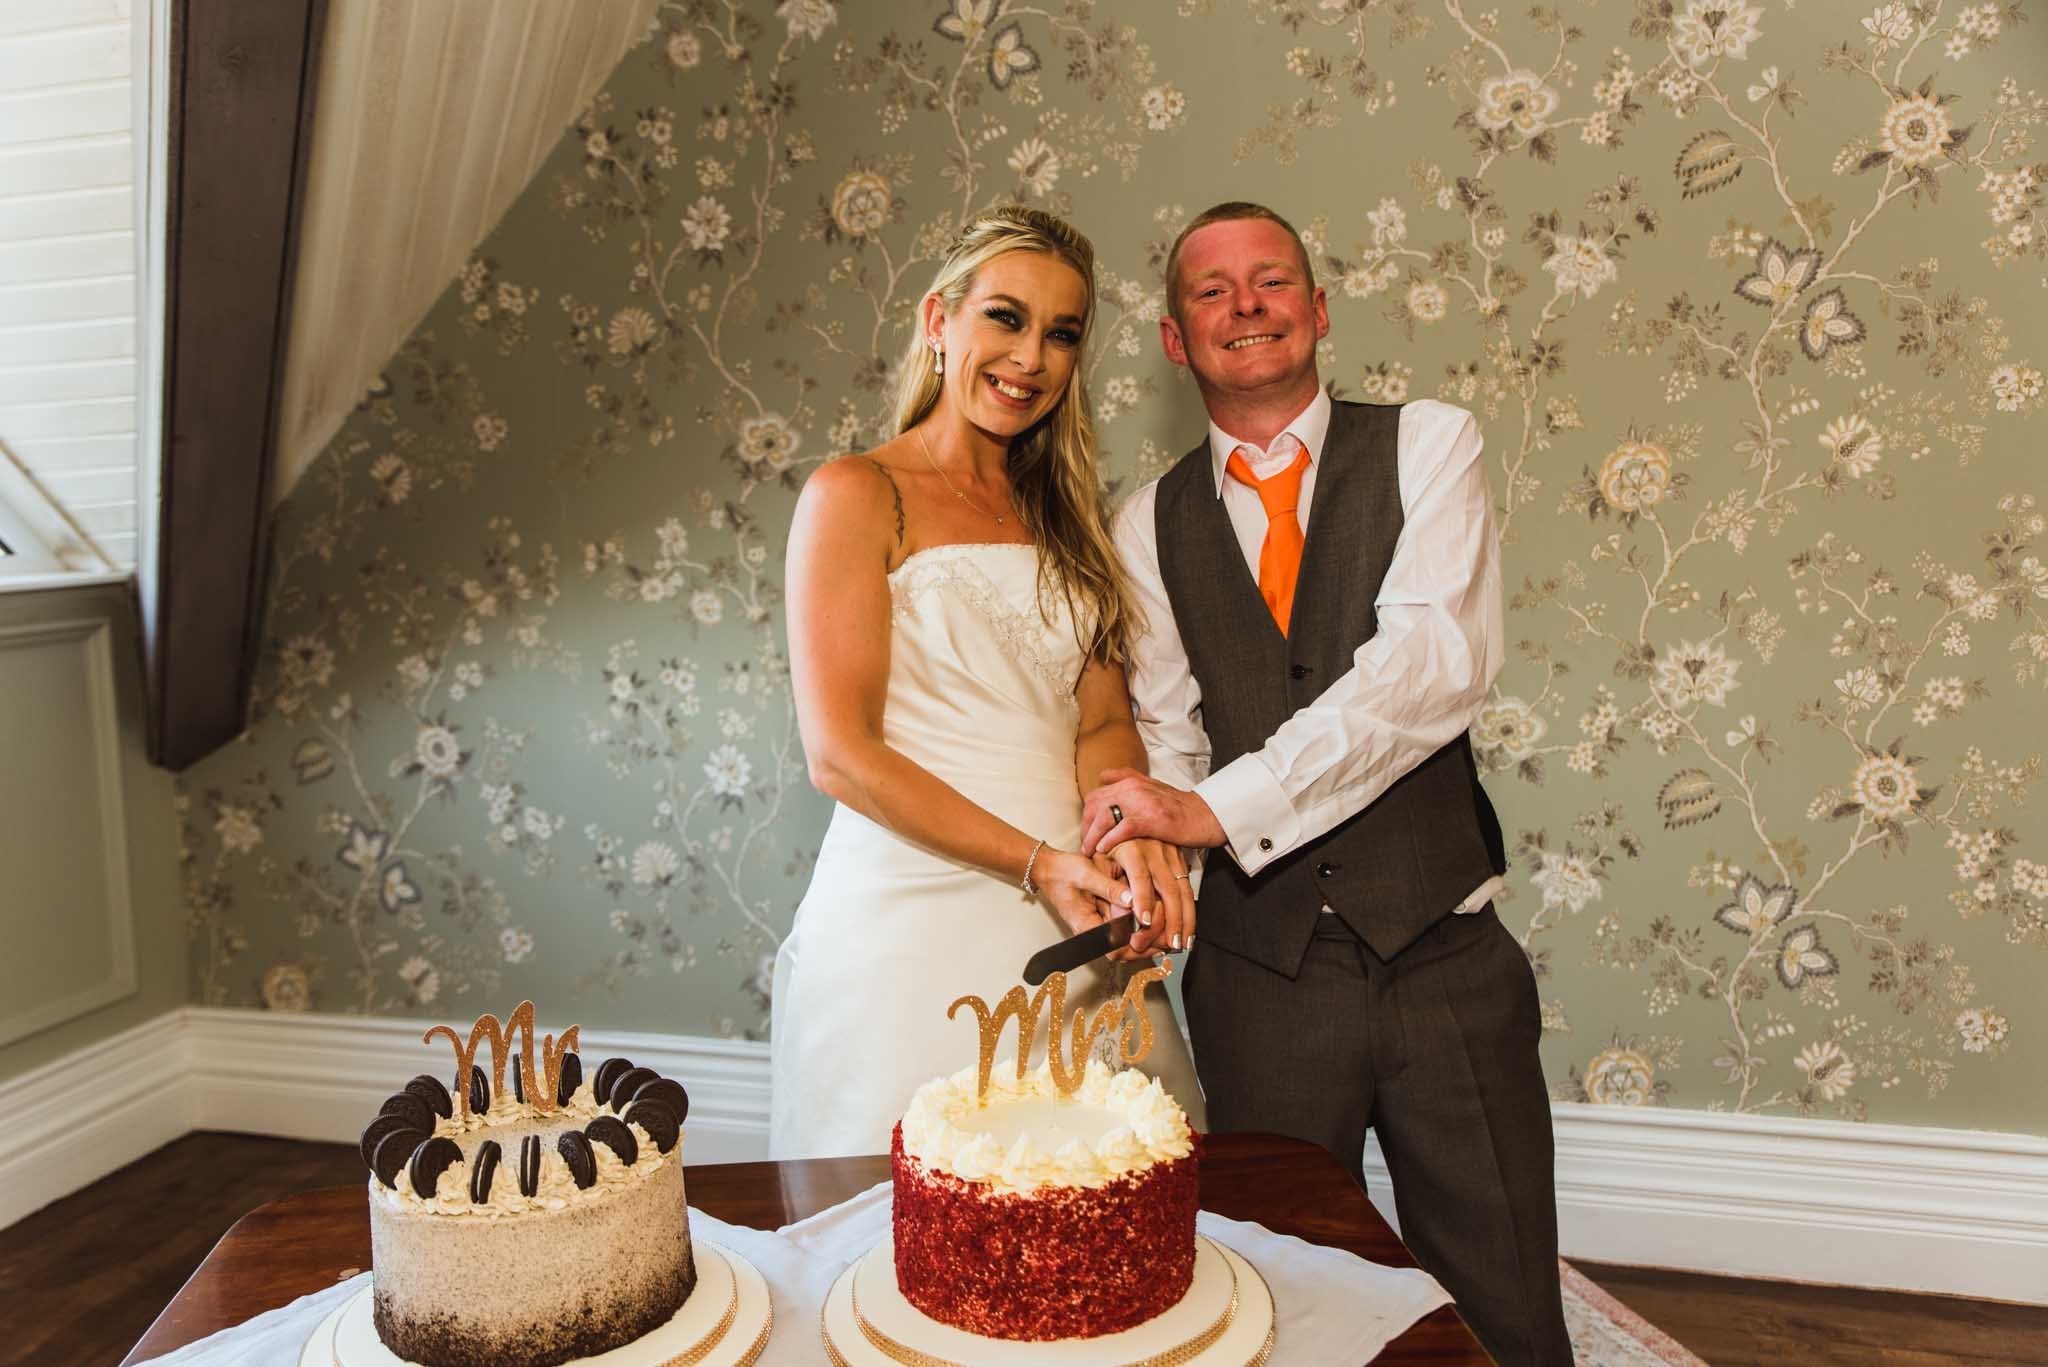  The bride and groom cut the wedding cake in the corner of the reception room with both hands on knive looking at the camera. 